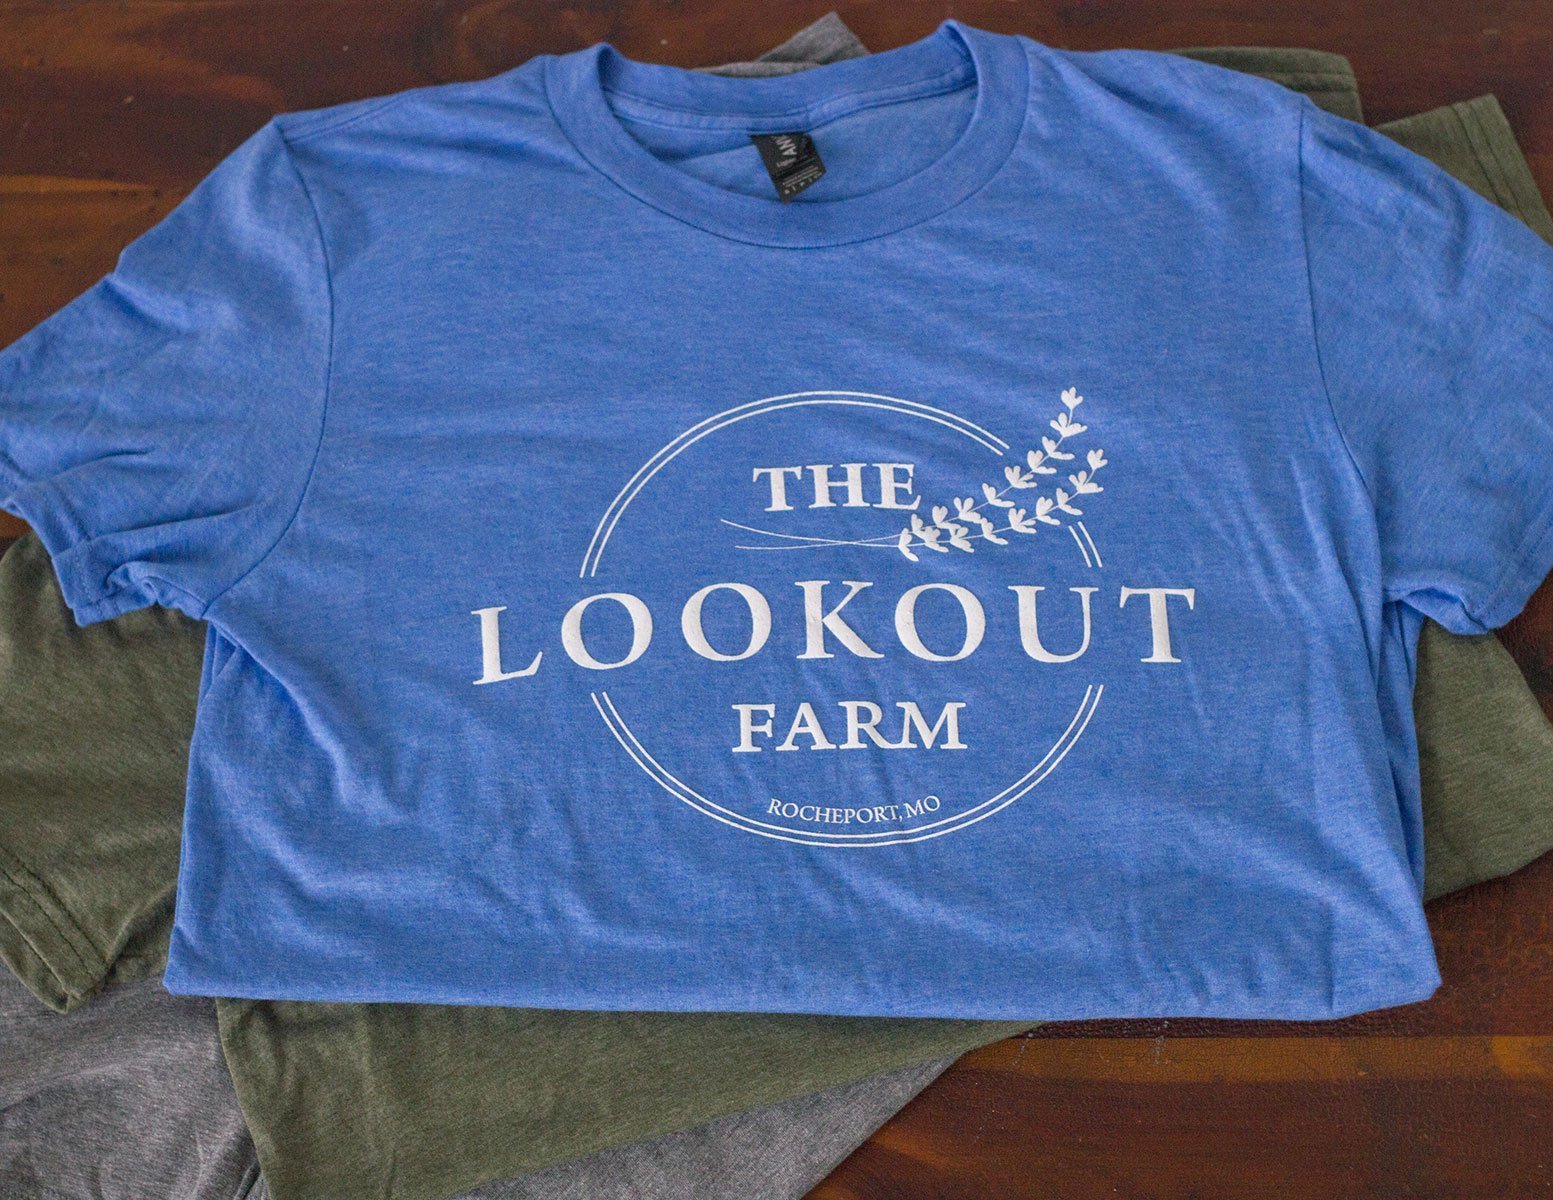 The Lookout Farm T-Shirt